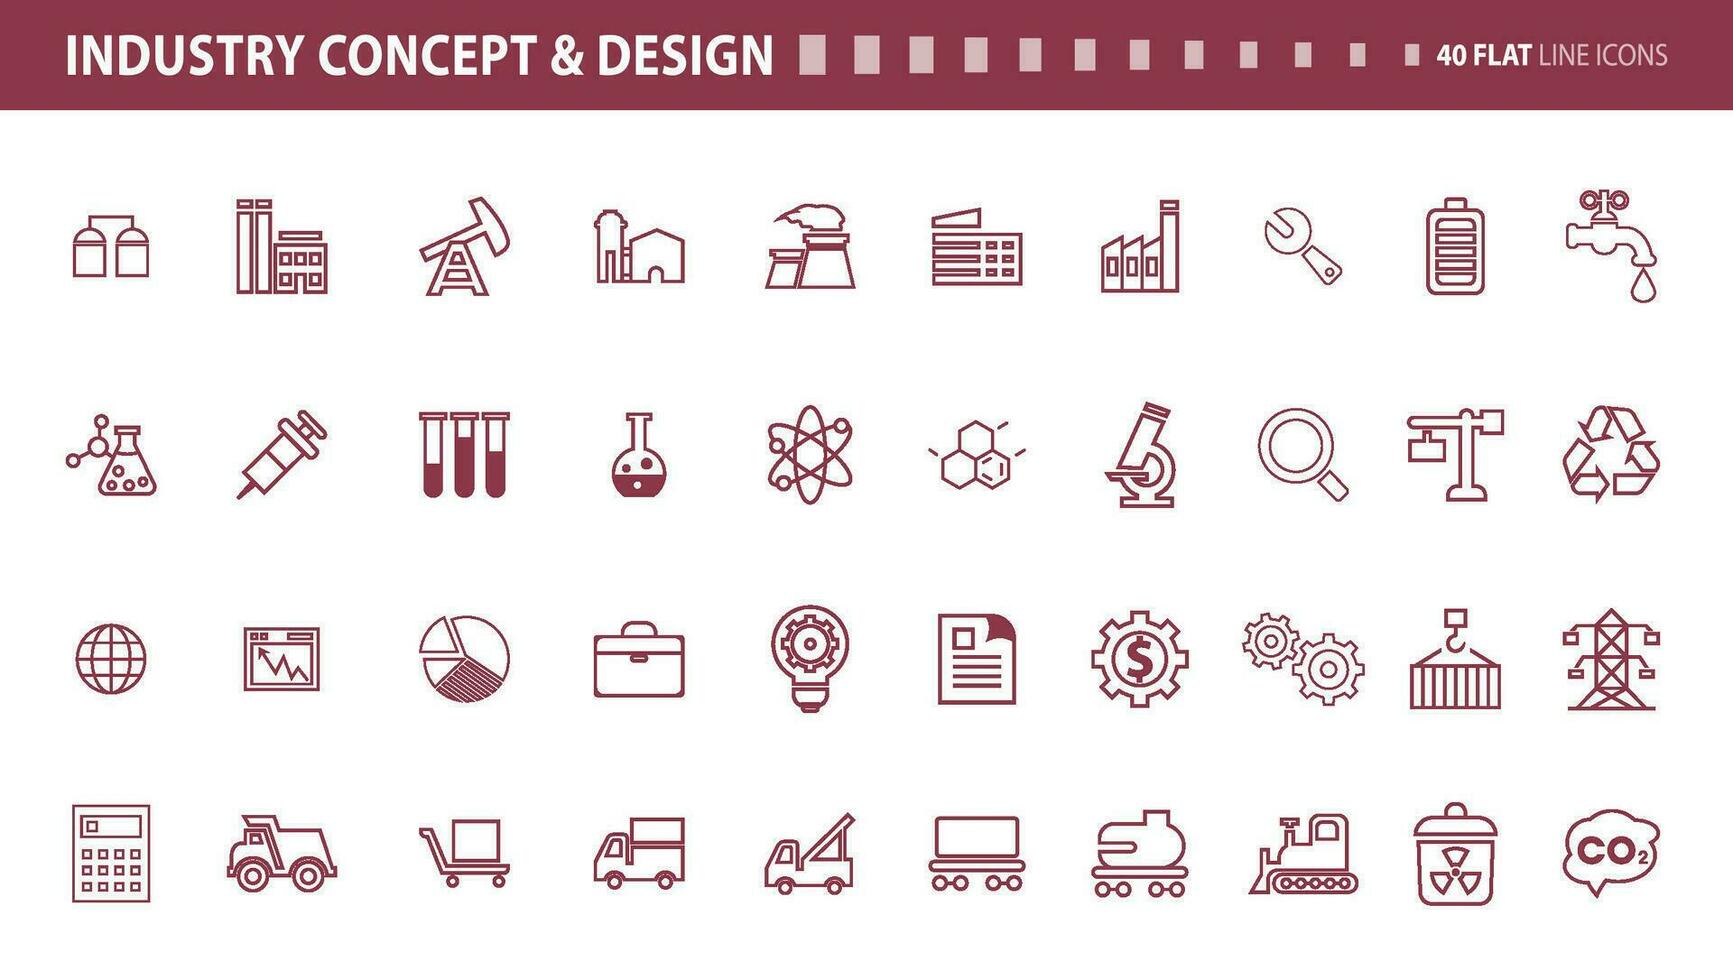 Set of flat line icons of industry concept and design. Vector concepts for website and app design and development.